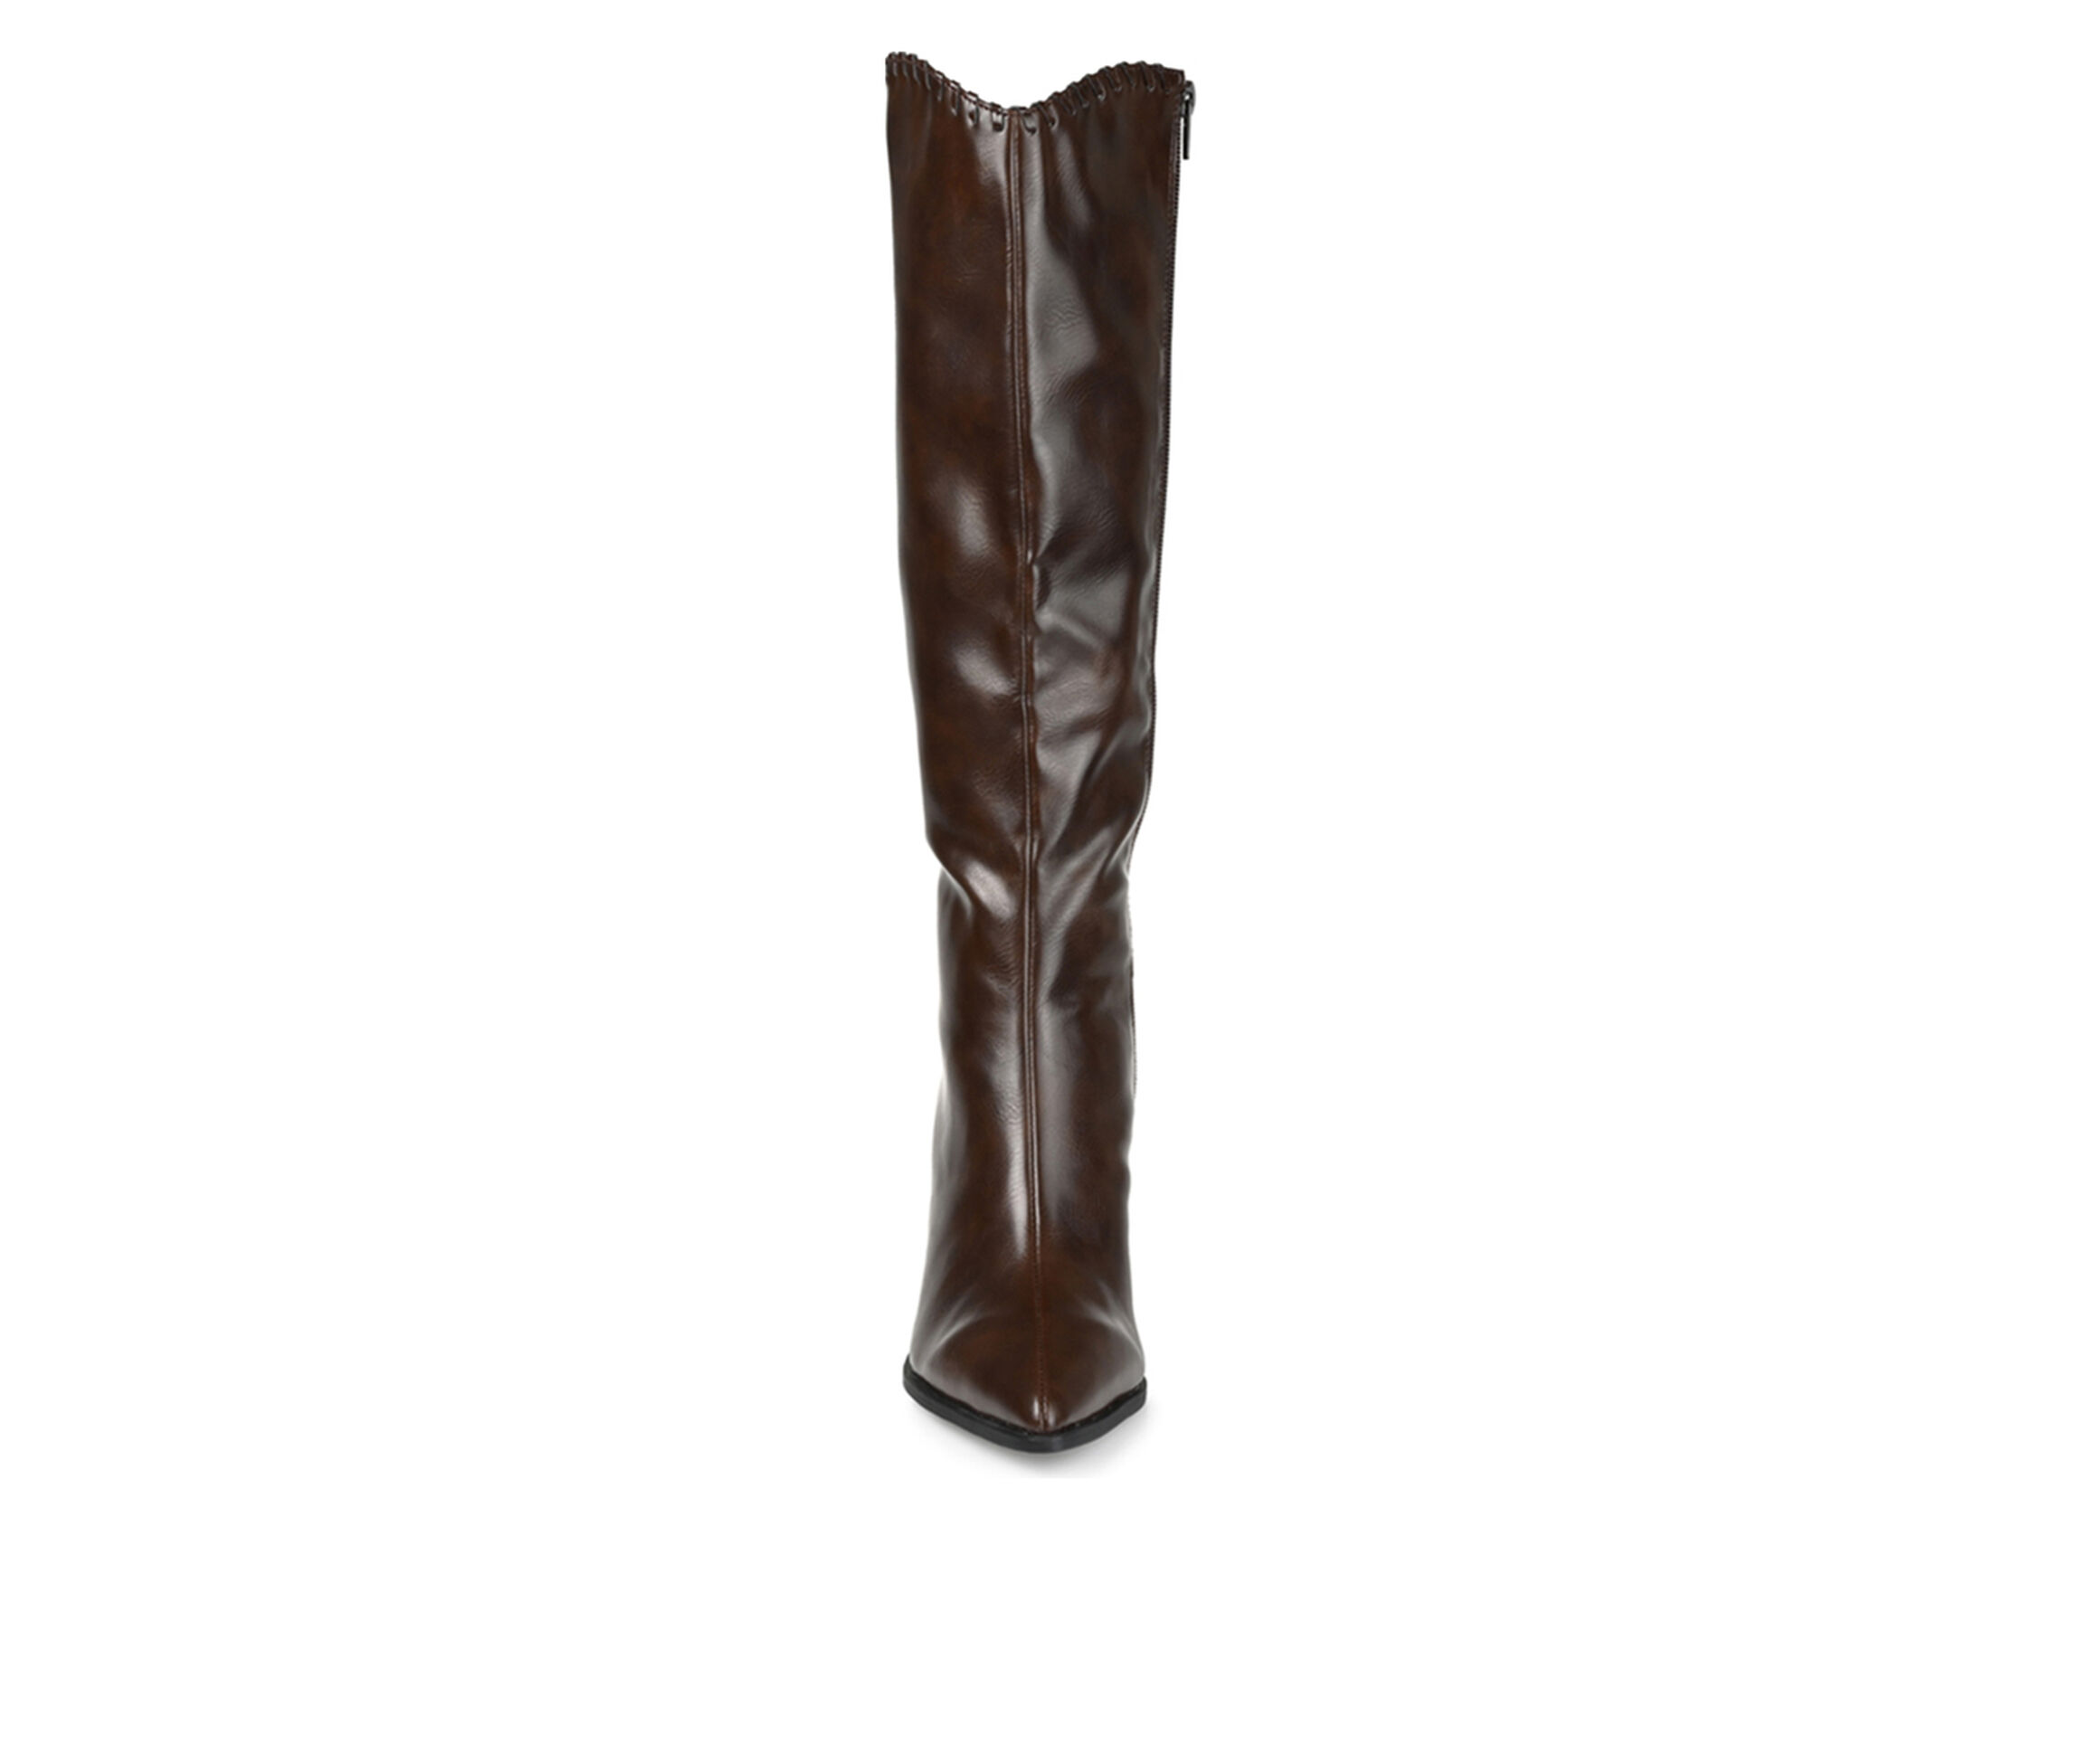 Women's Journee Collection Daria Extra Wide Calf Knee High Boot in Brown Size 8.5 Medium